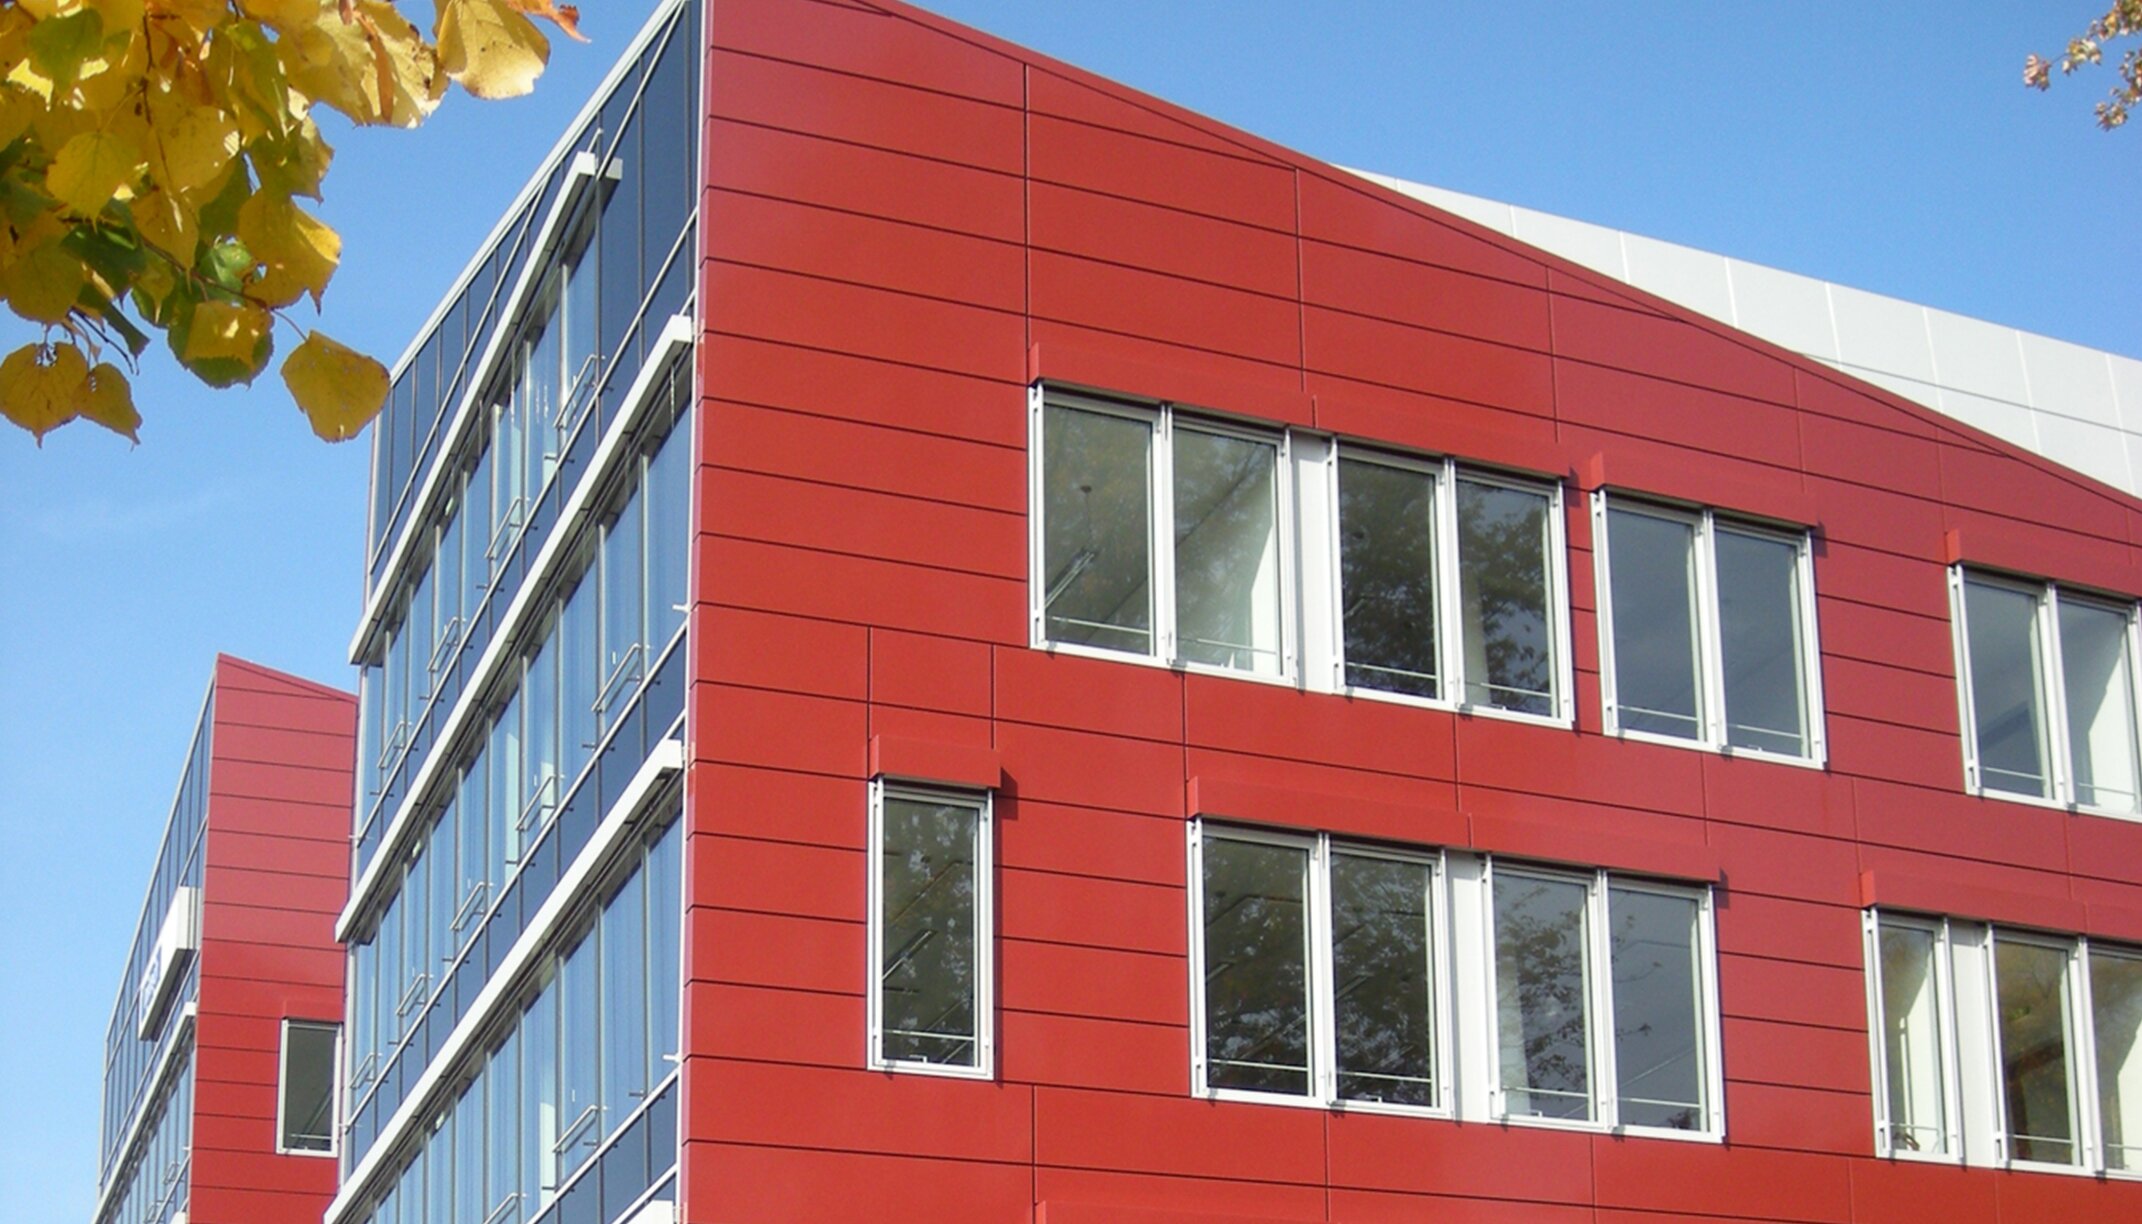 "Grafenberger Höfe"; back ventilated rainsceen facade made of aluminum and stainless steel